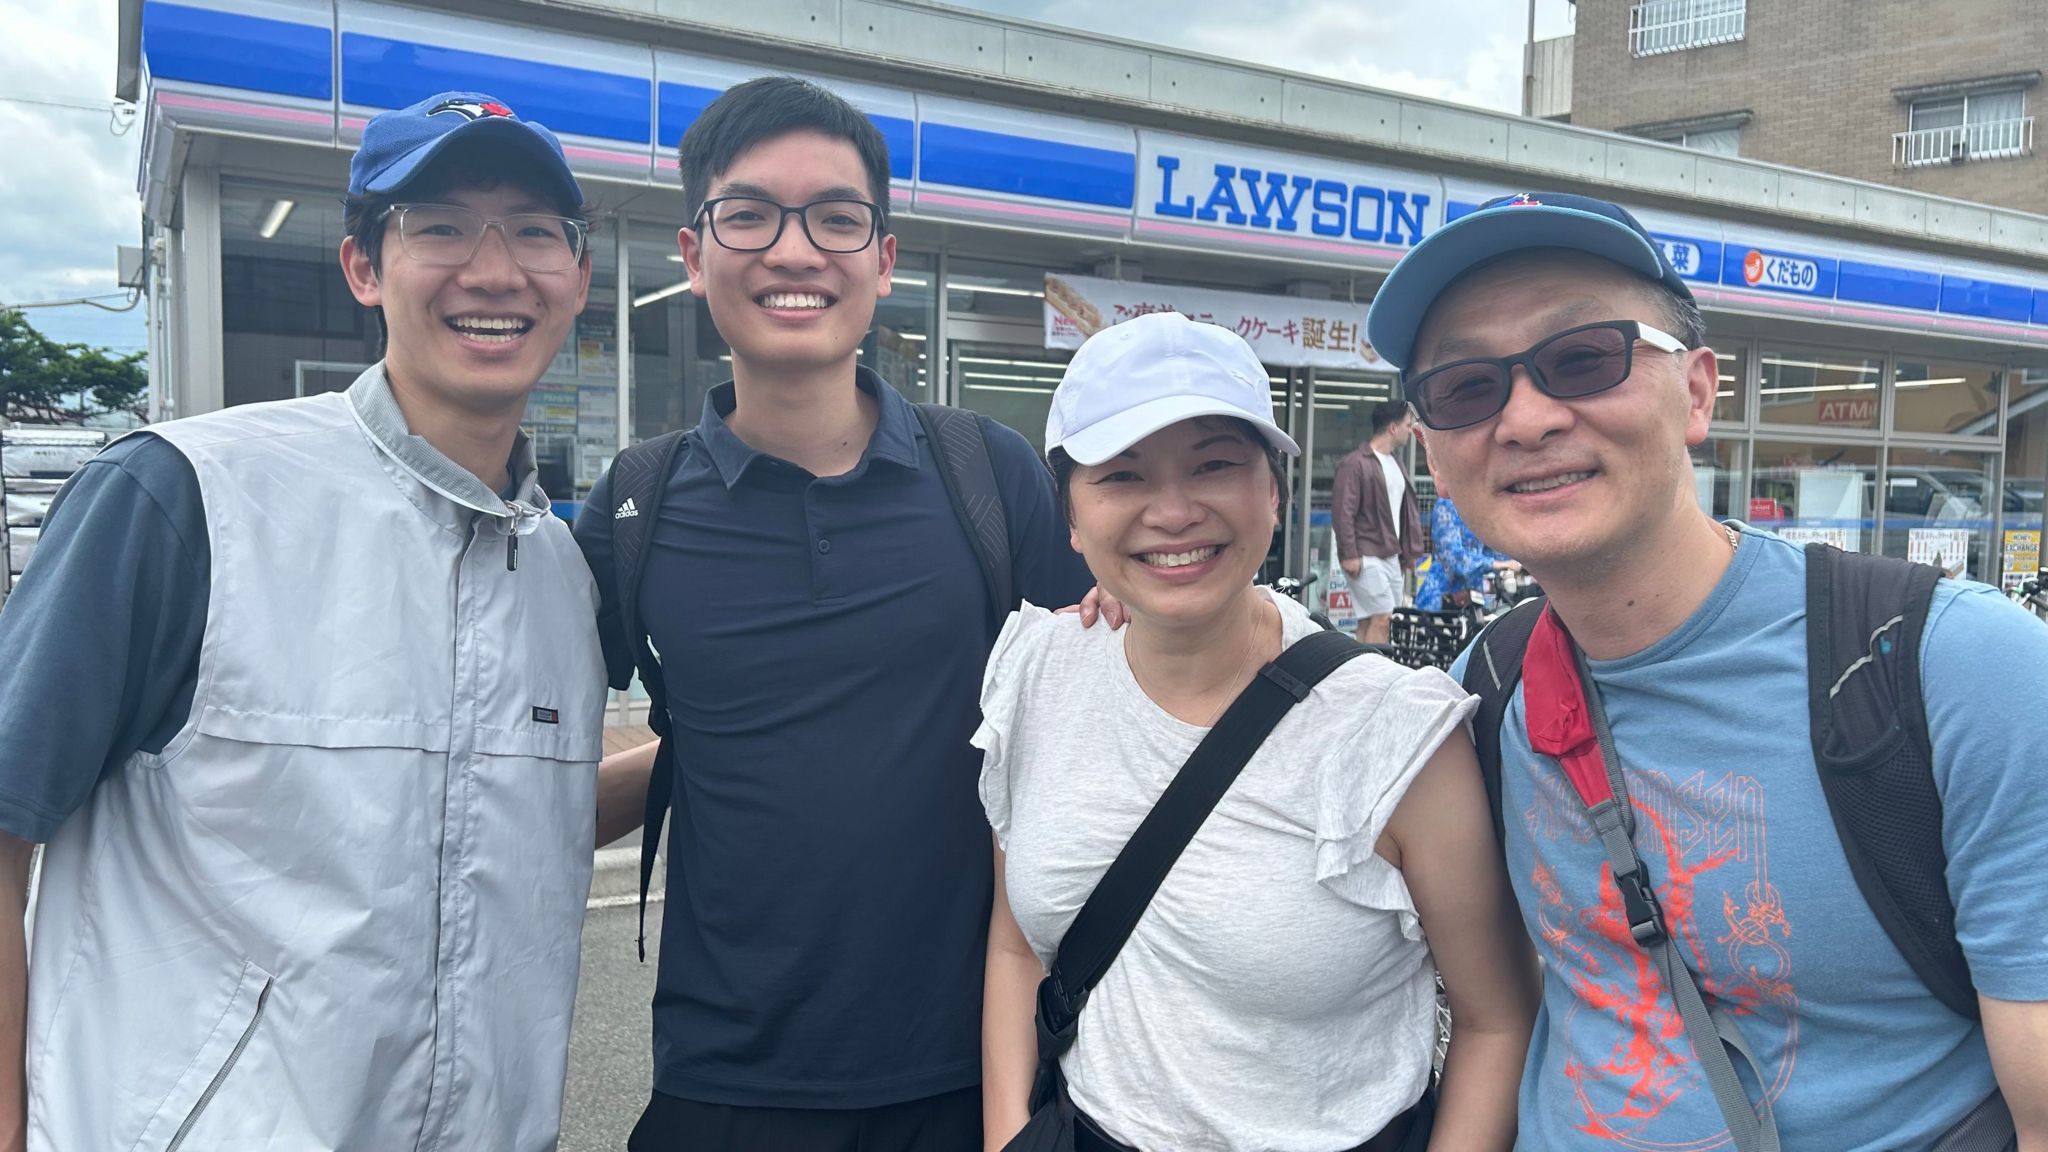 Wandy Chow and her family in front of the Lawson store